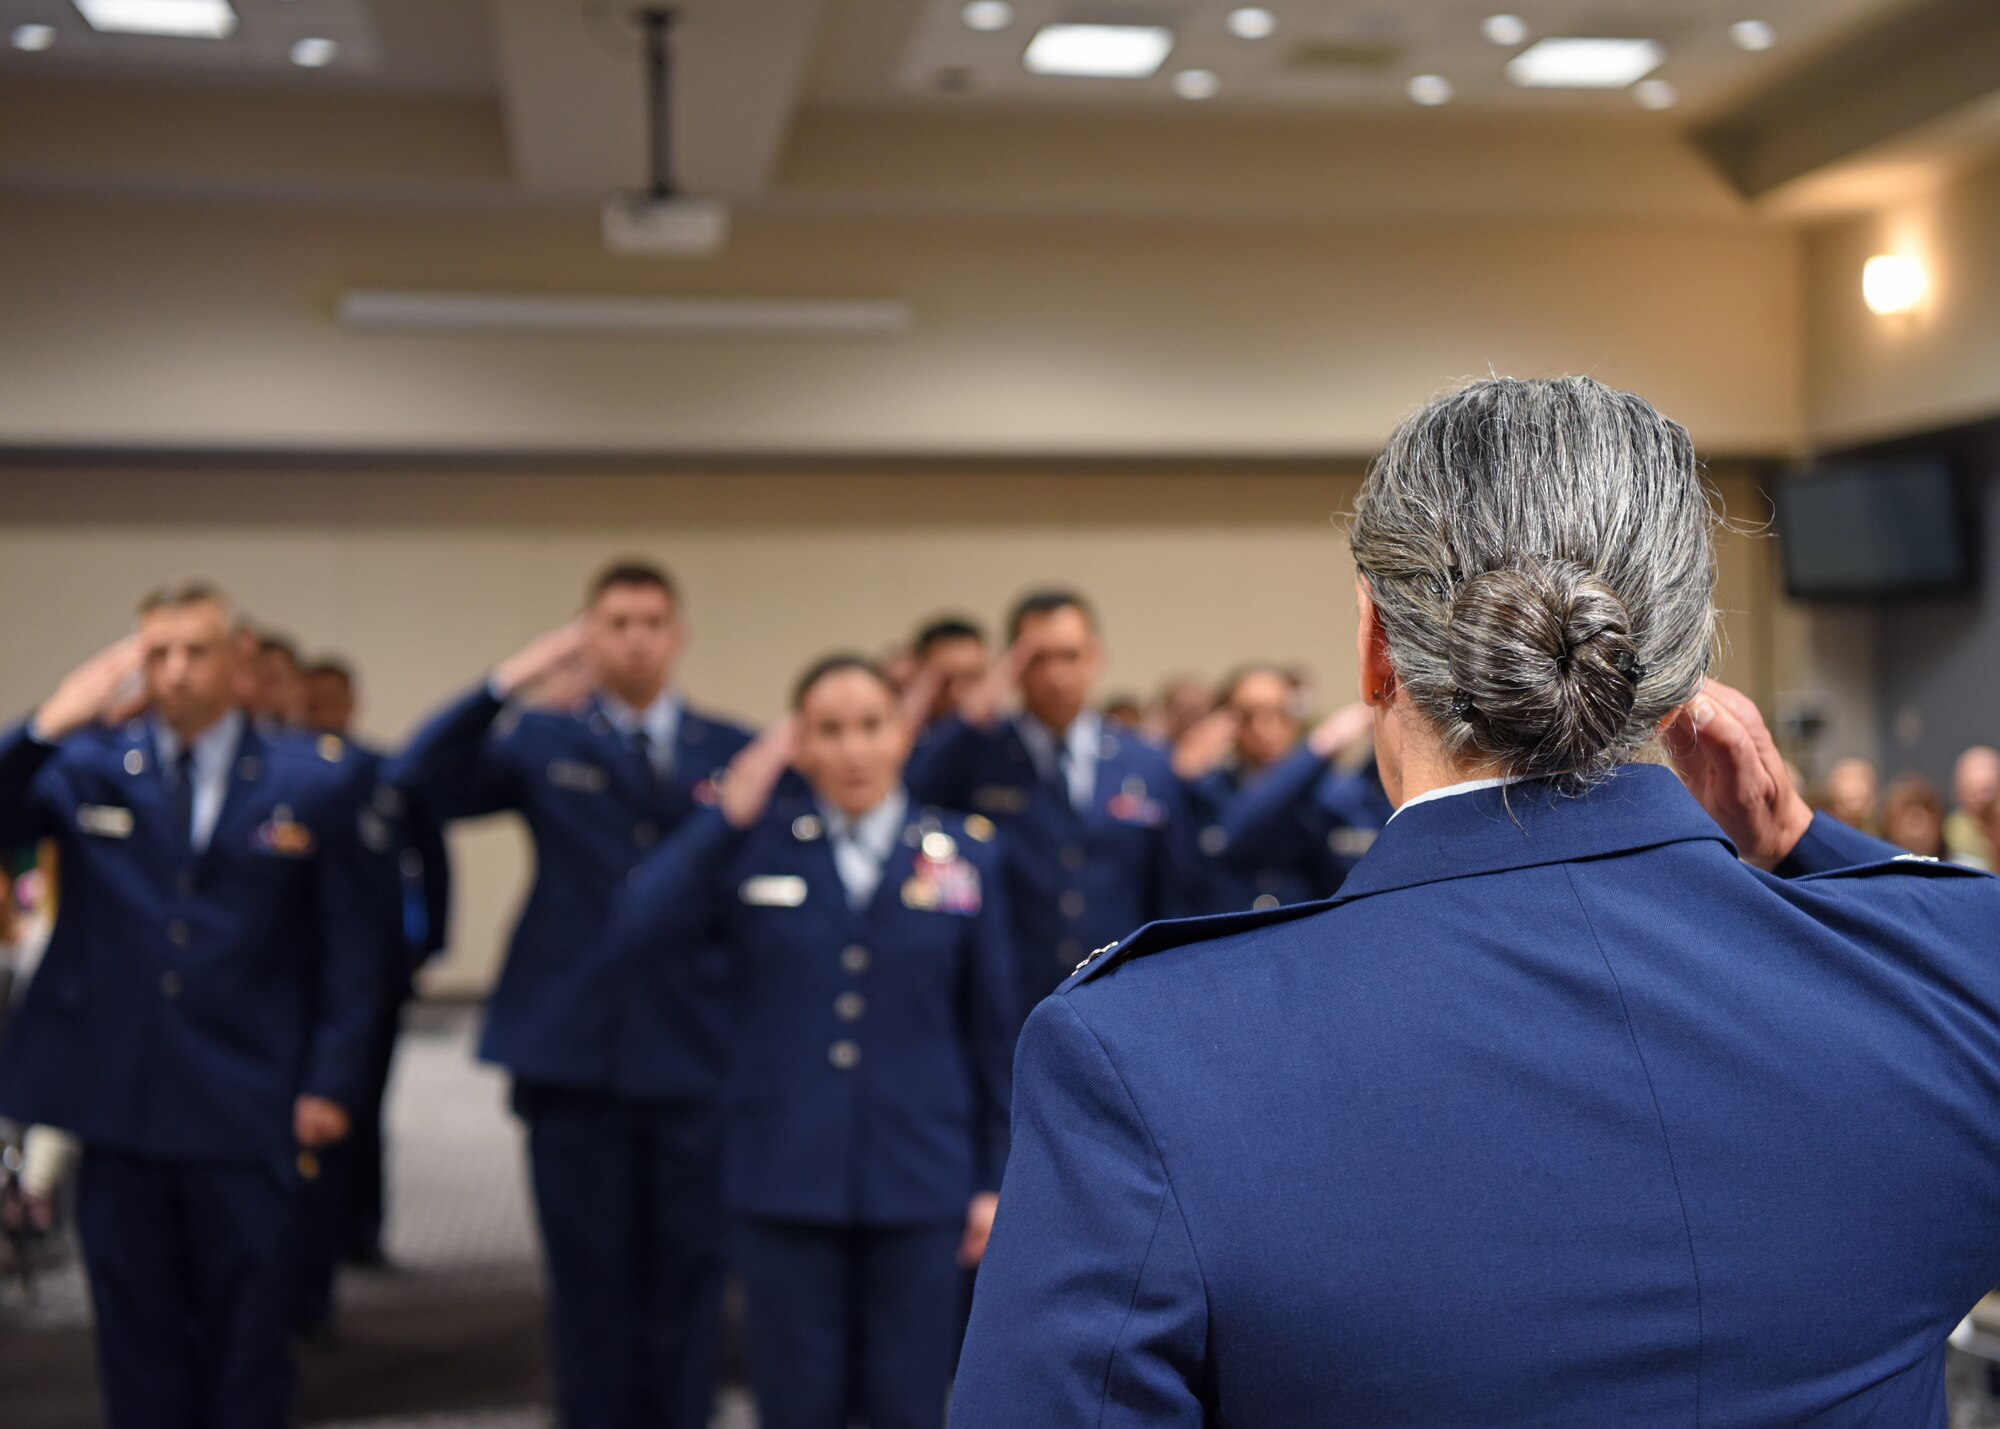 U.S. Air Force Lt. Col. Brenda Miazga, 17th Operational Medical Readiness Squadron incoming commander, salutes the 17th OMRS flight at the 17th OMRS change of command ceremony at the Powell Event Center, June 2, 2022. Miazga assumed command from Col. Roy Louque who is moving to Nellis Air Force Base. (U.S. Air Force photo by Senior Airman Ethan Sherwood)